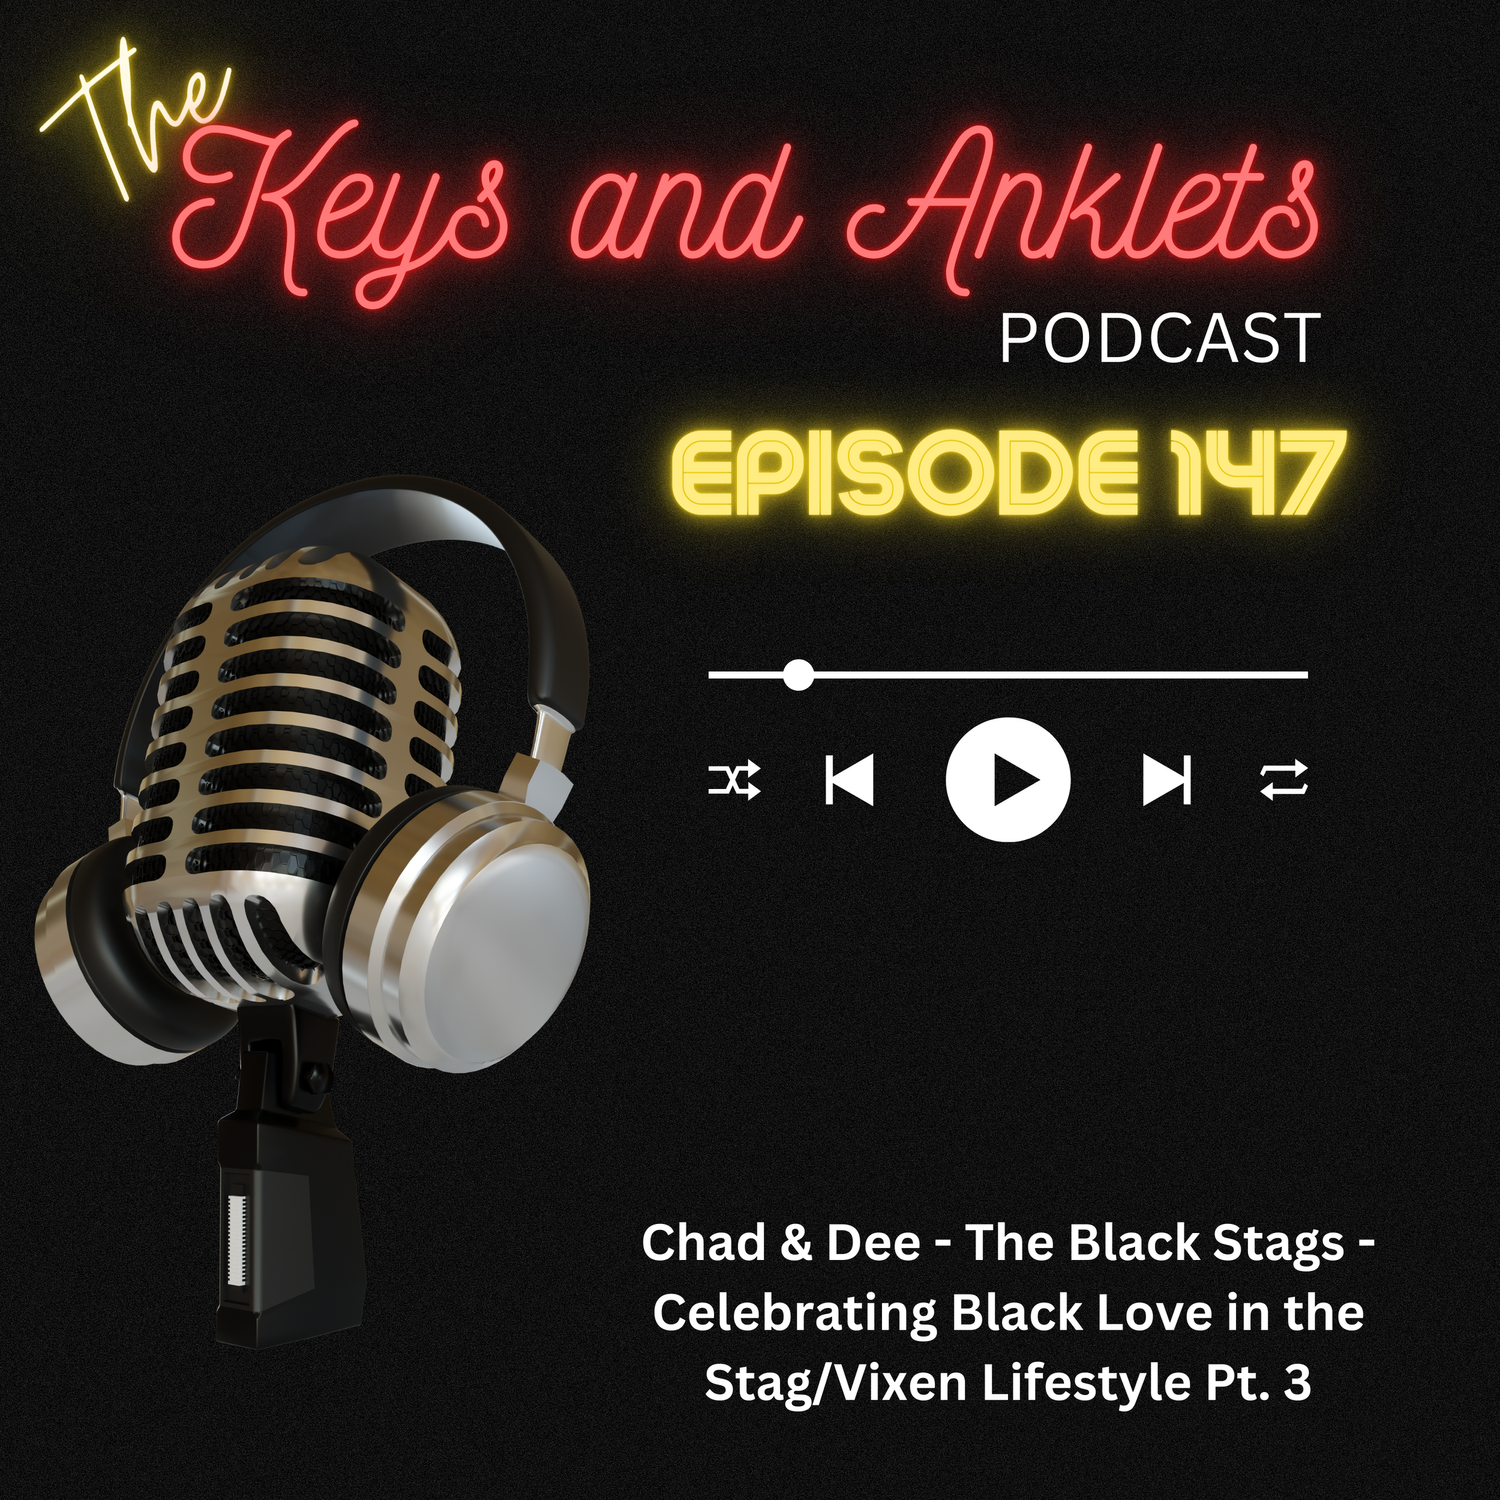 Episode 147- Chad and Dee - Celebrating Black Love in the Stag/Vixen Lifestyle Pt. 3 feat, The Stags